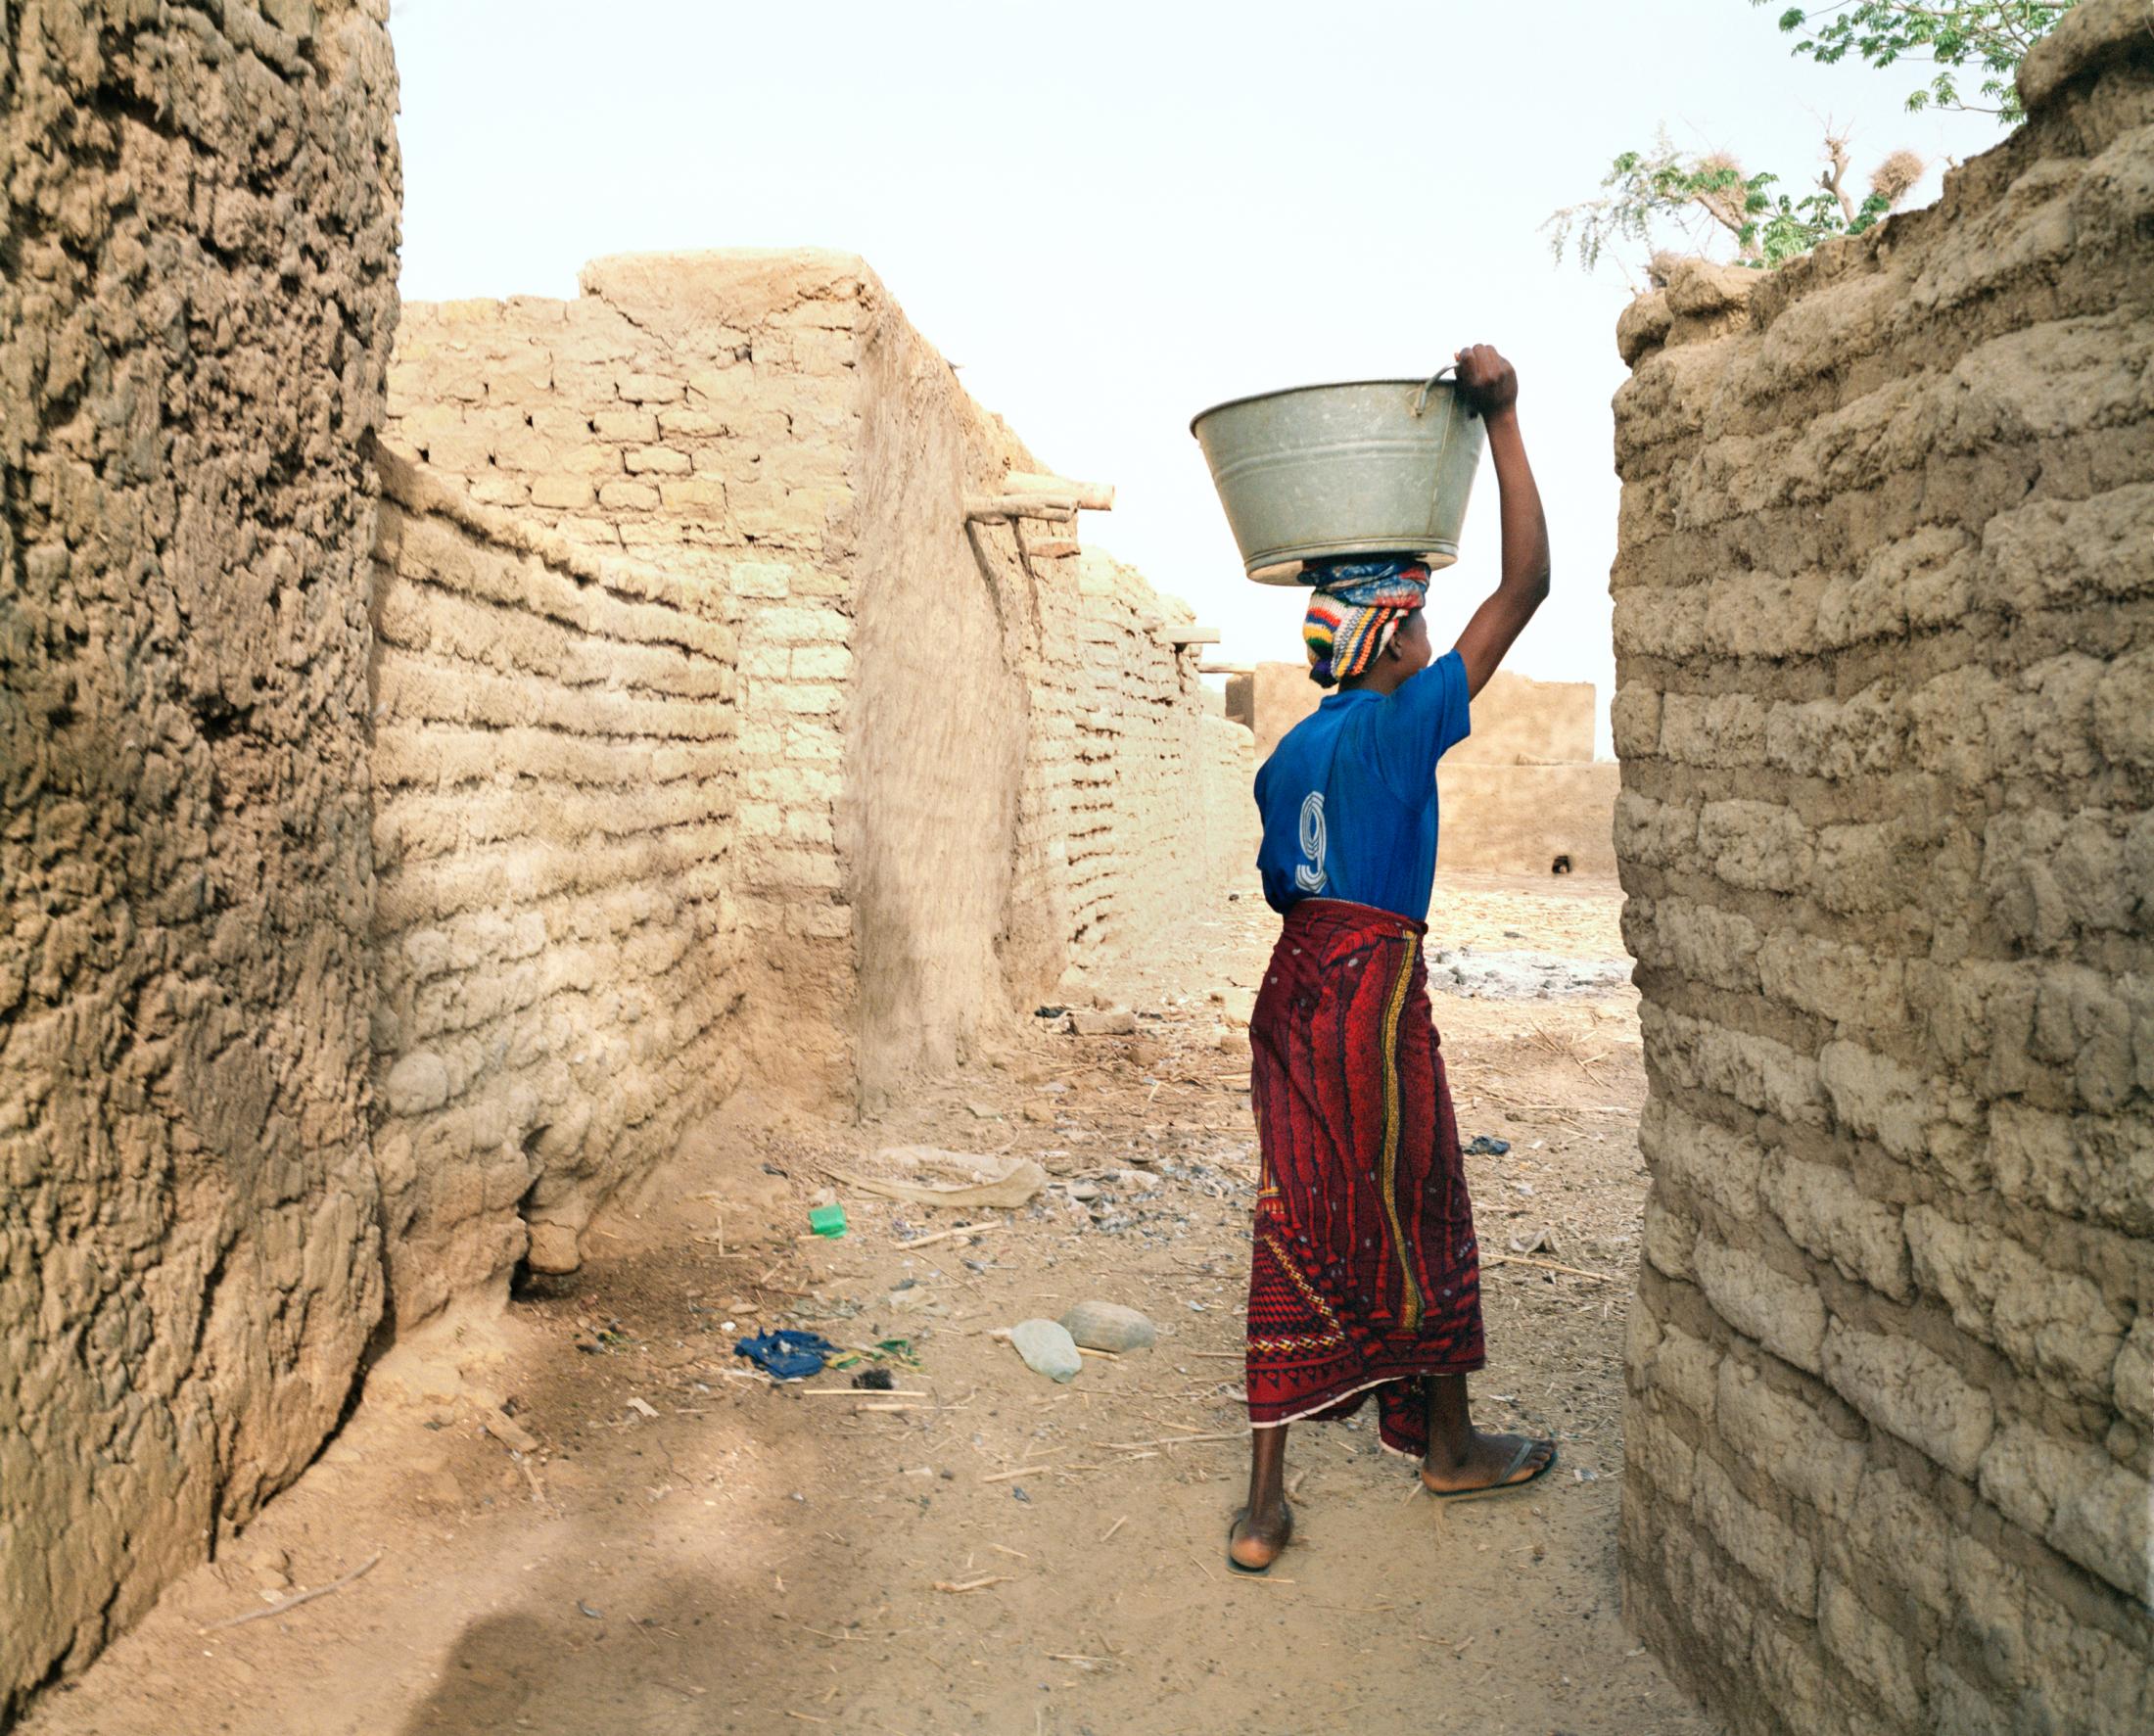 Mariam heading to the community water pump. Tinto, Mali. 2007.